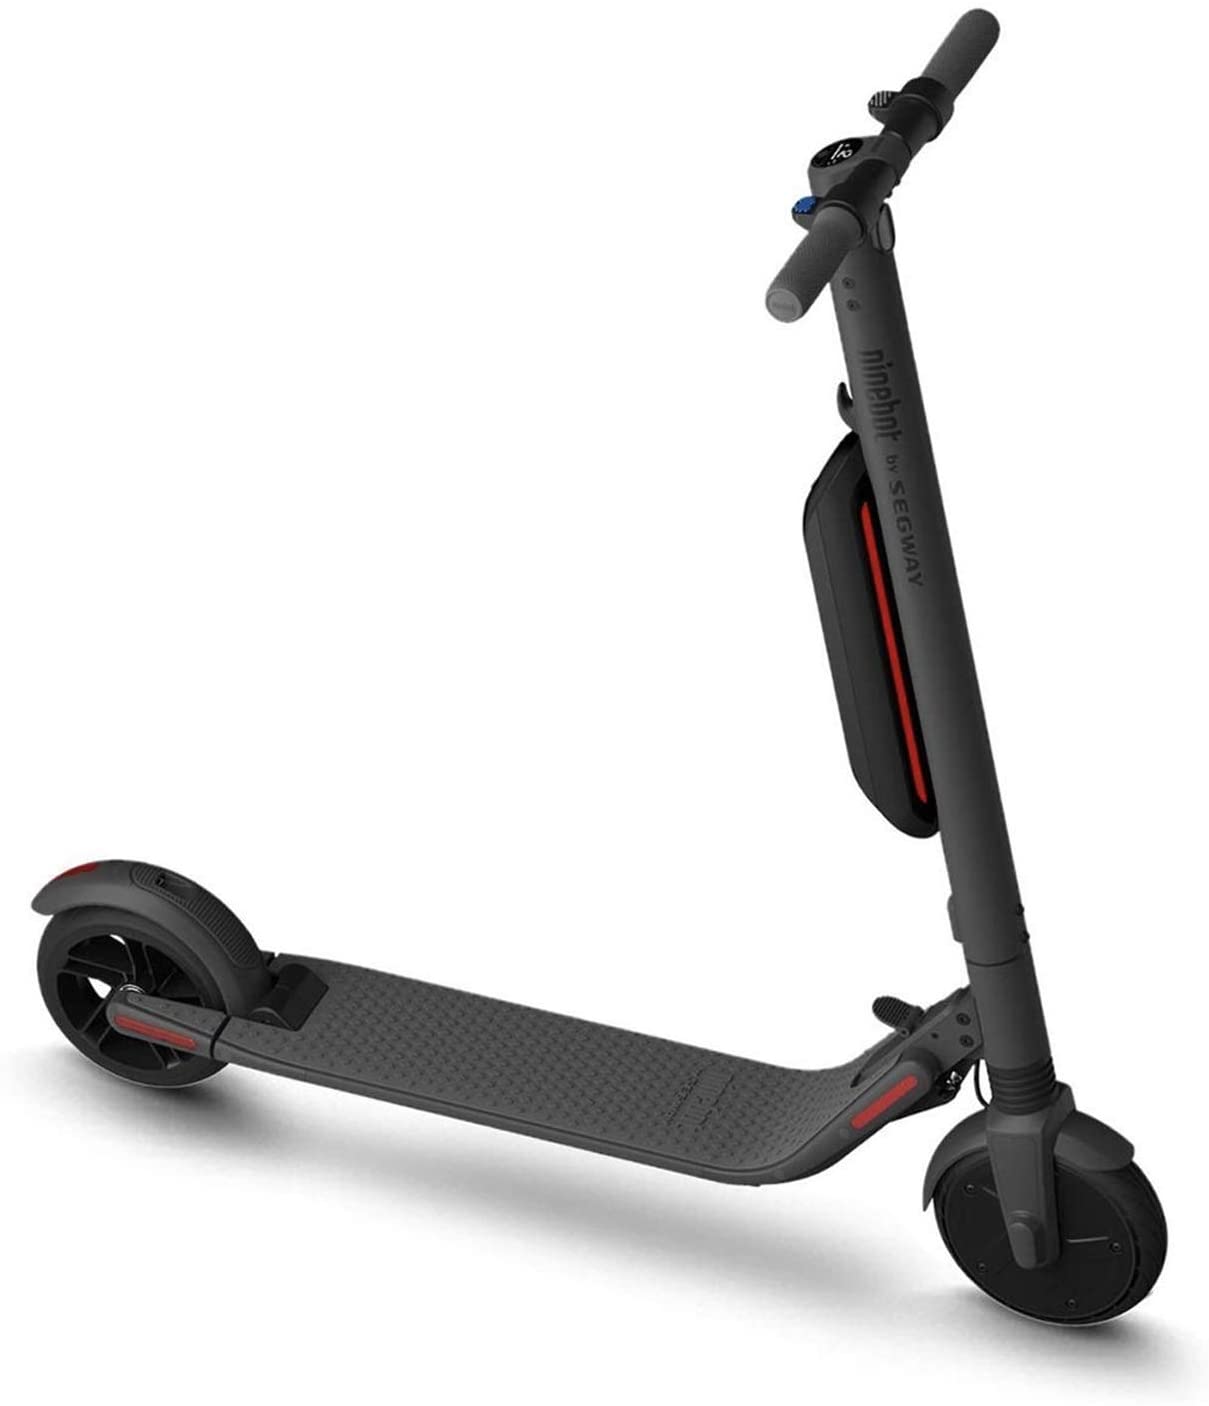 Segway Ninebot ES4 electric scooter from Amazon $539.99